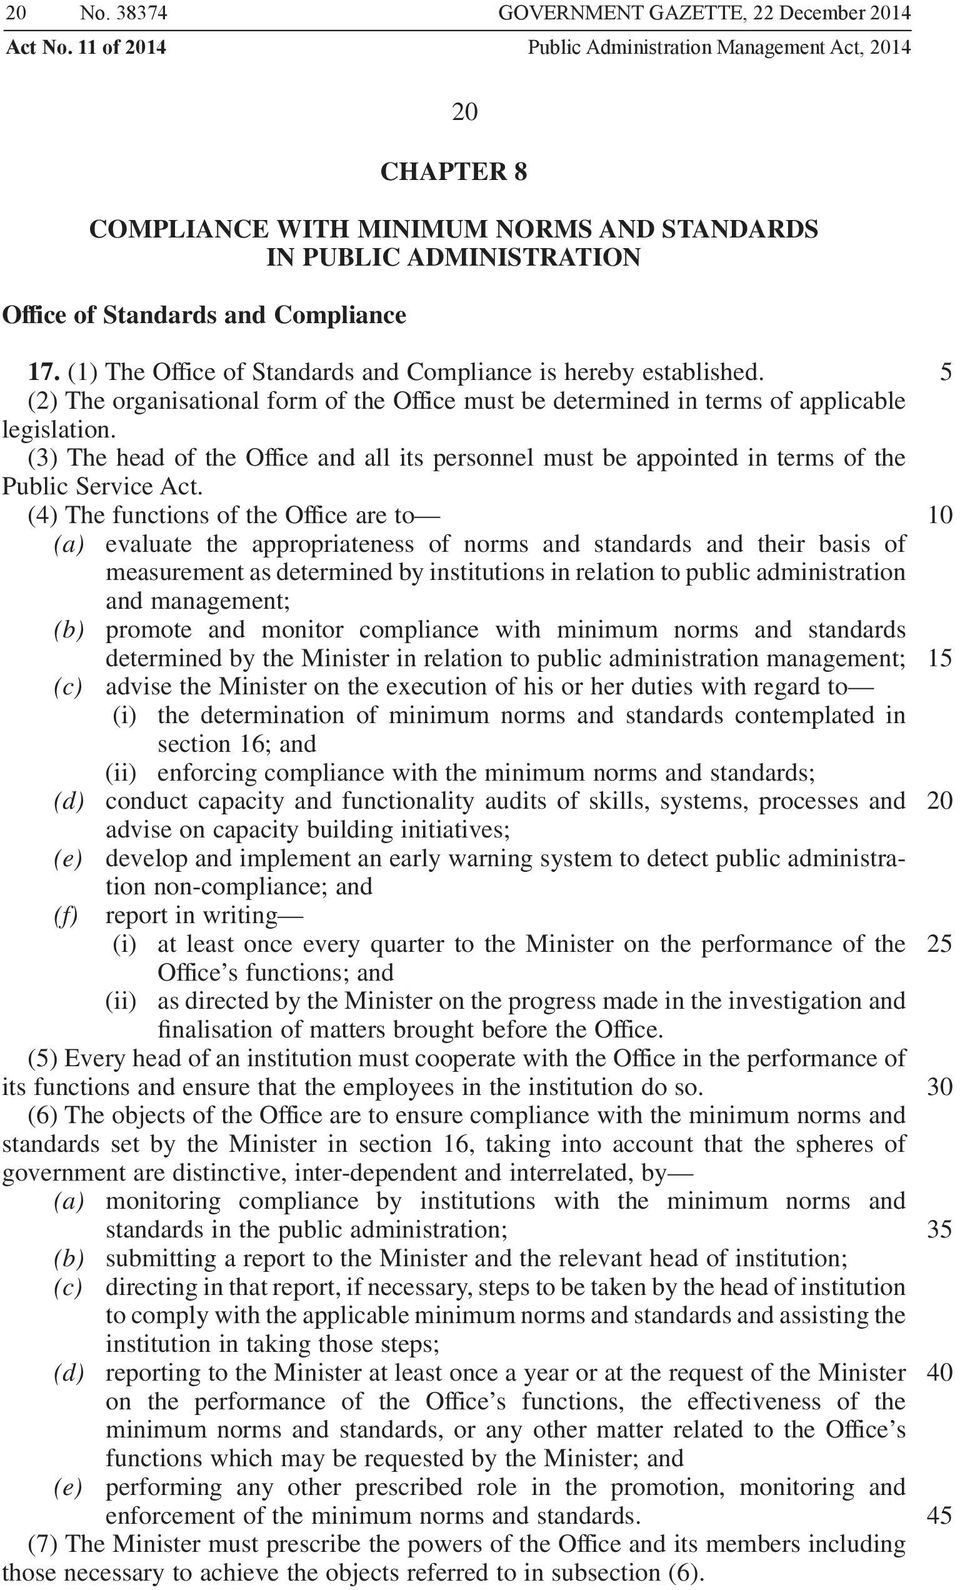 (3) The head of the Office and all its personnel must be appointed in terms of the Public Service Act.